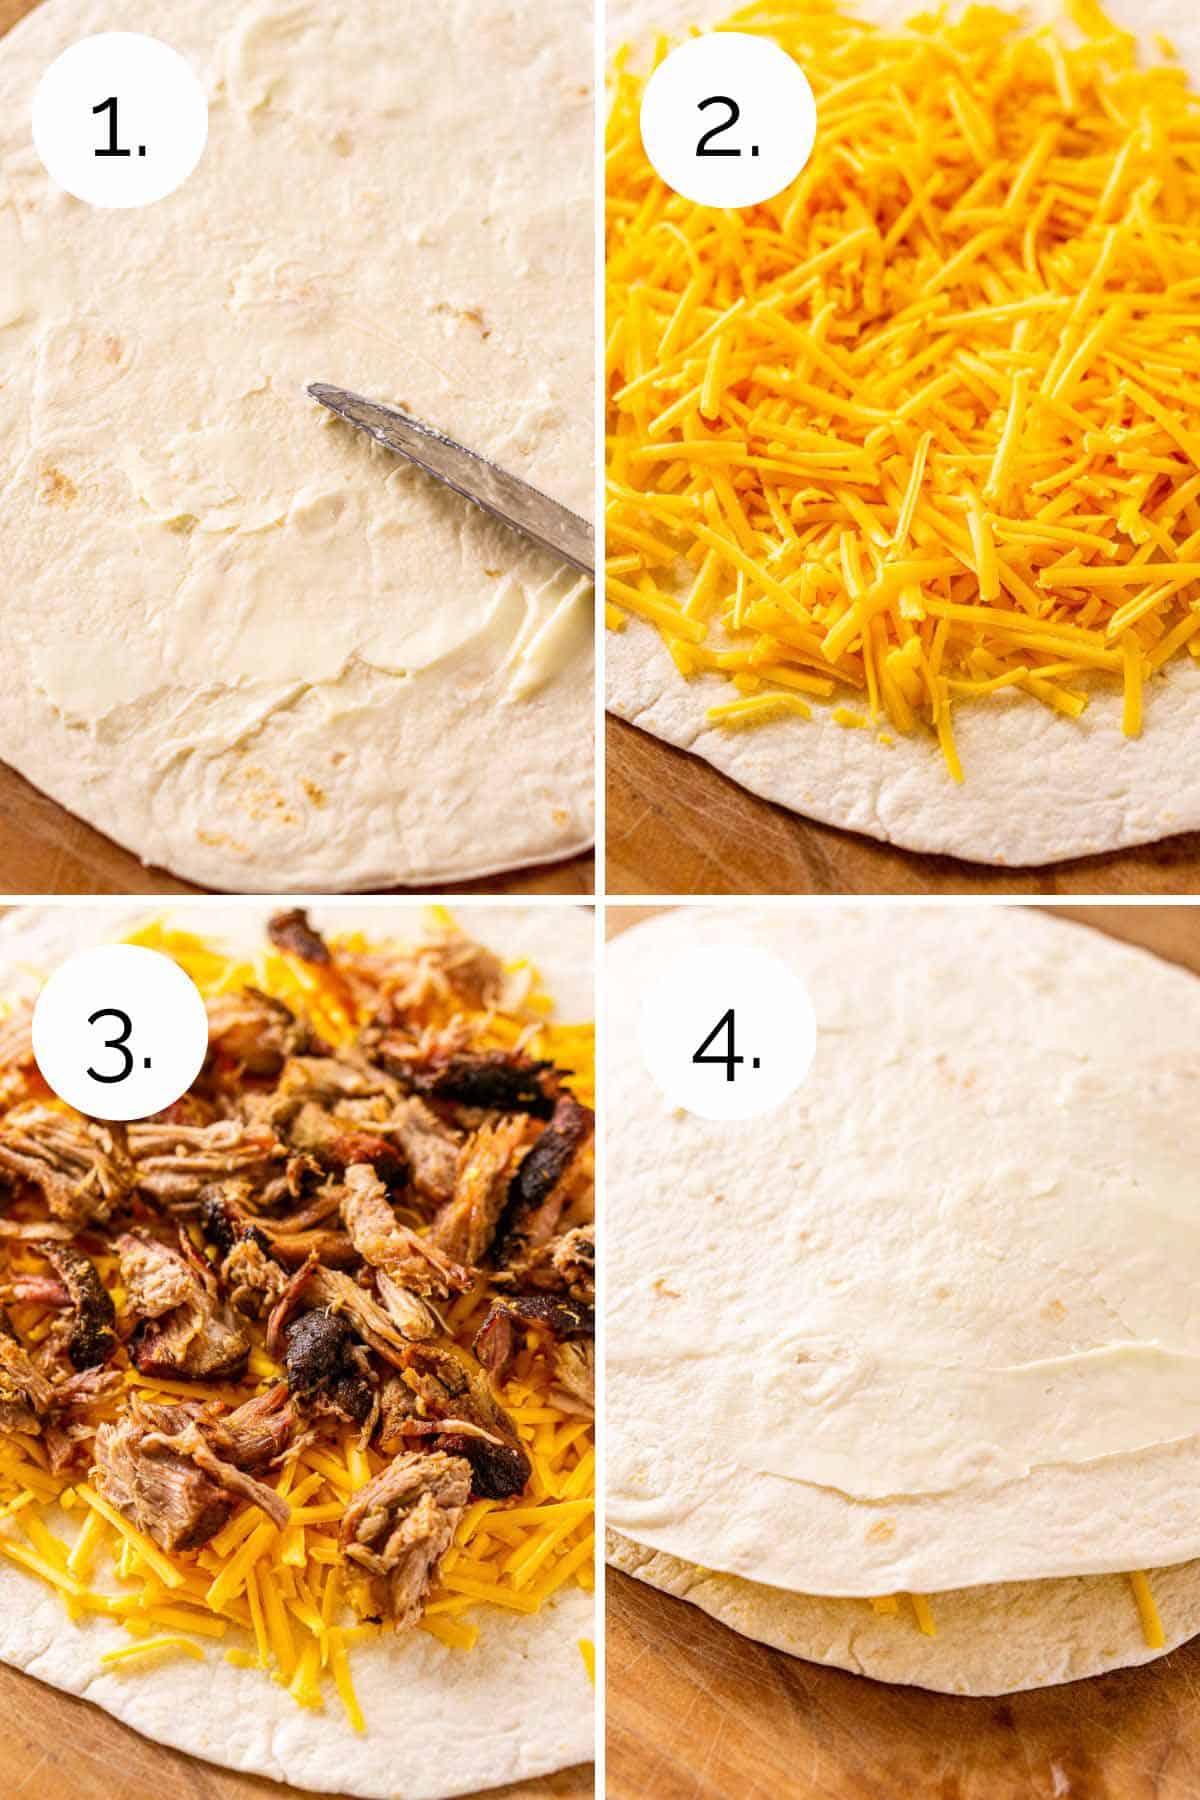 A four-photo collage showing the process of filling the tortillas with cheese and carnitas to make the quesadilla.